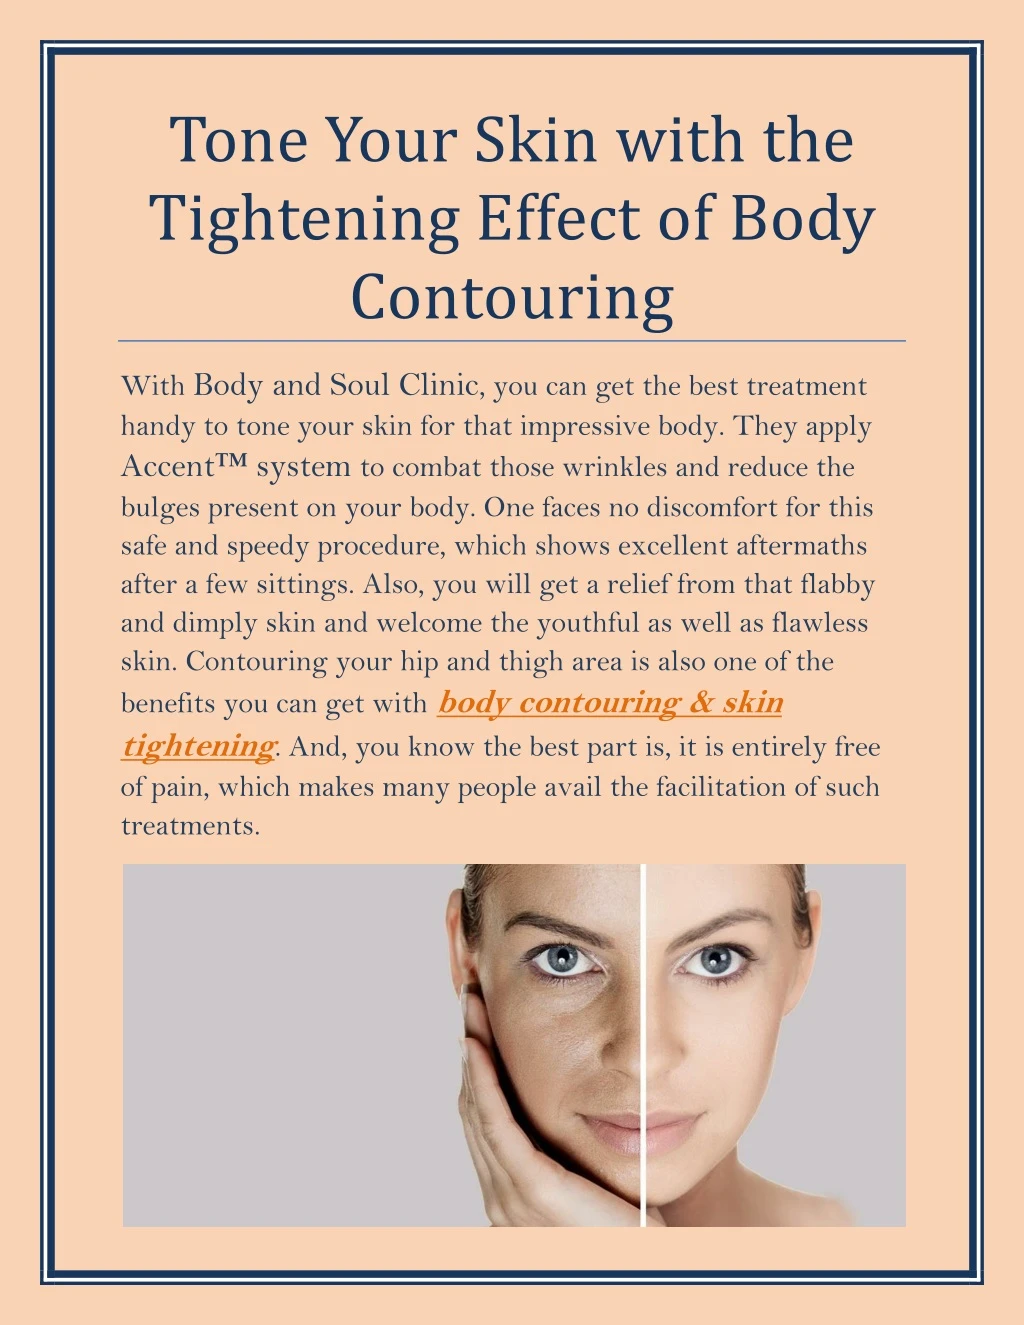 tone your skin with the tightening effect of body